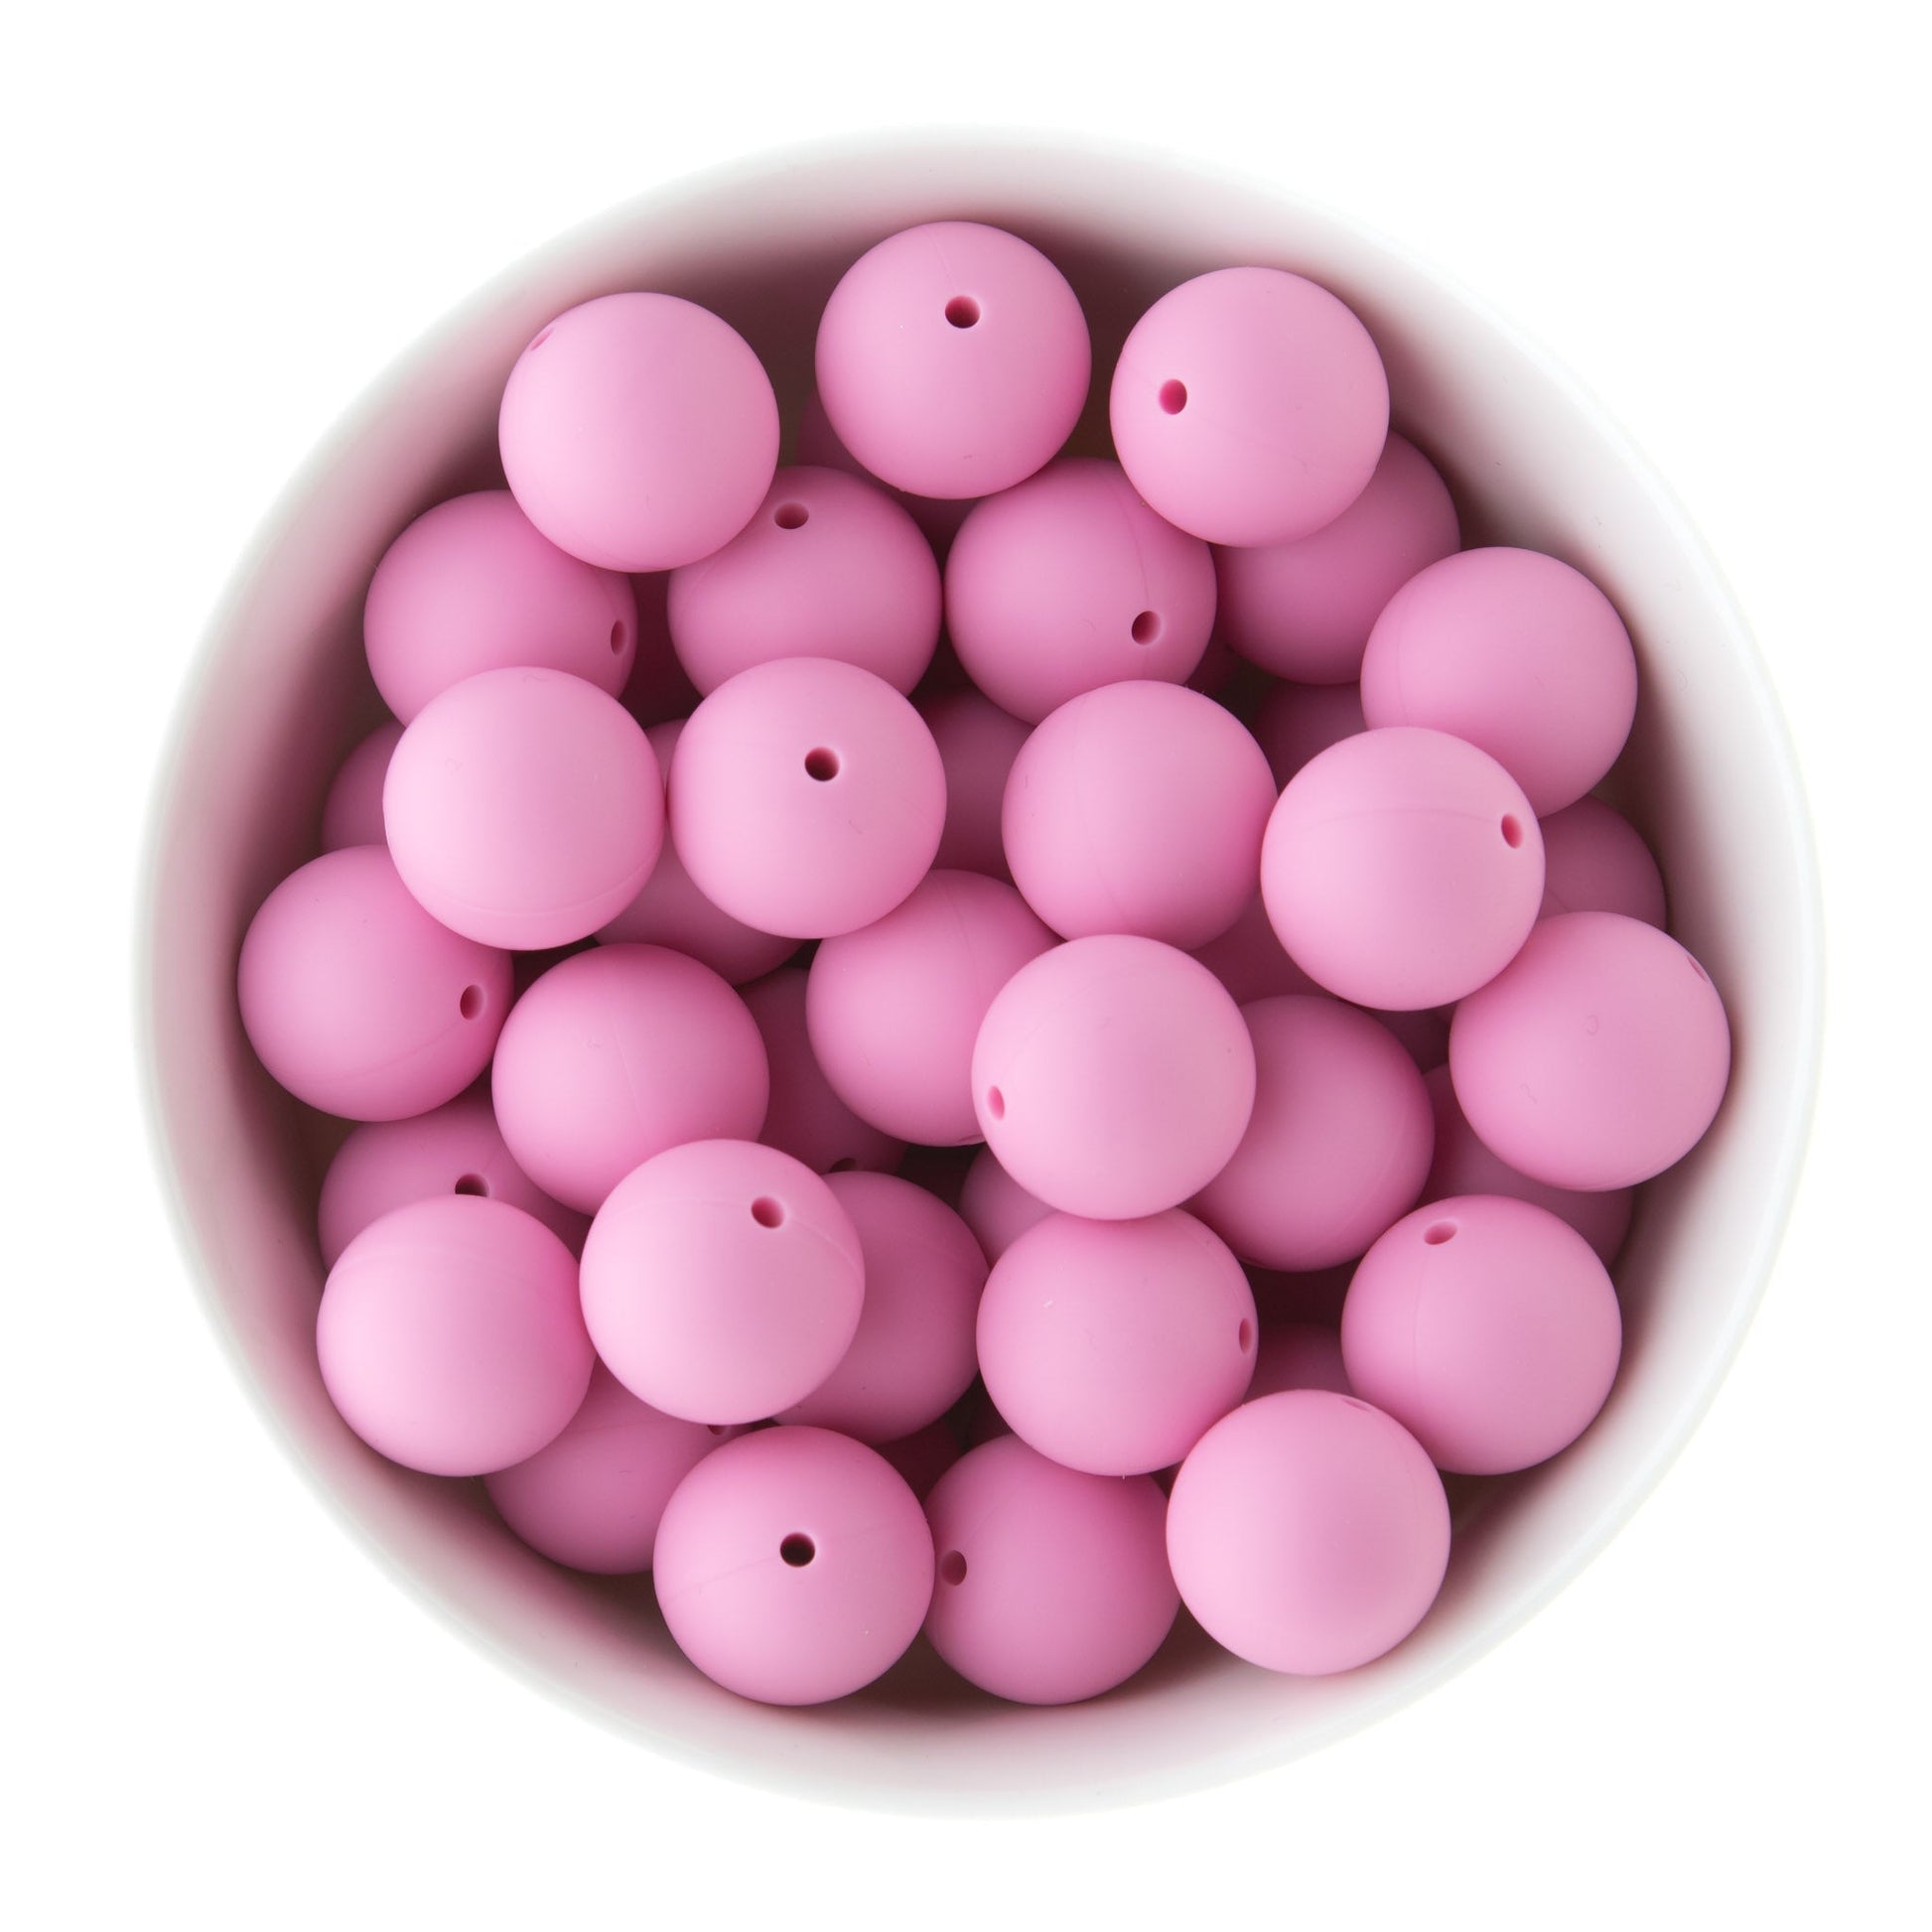 19mm Round Silicone Beads